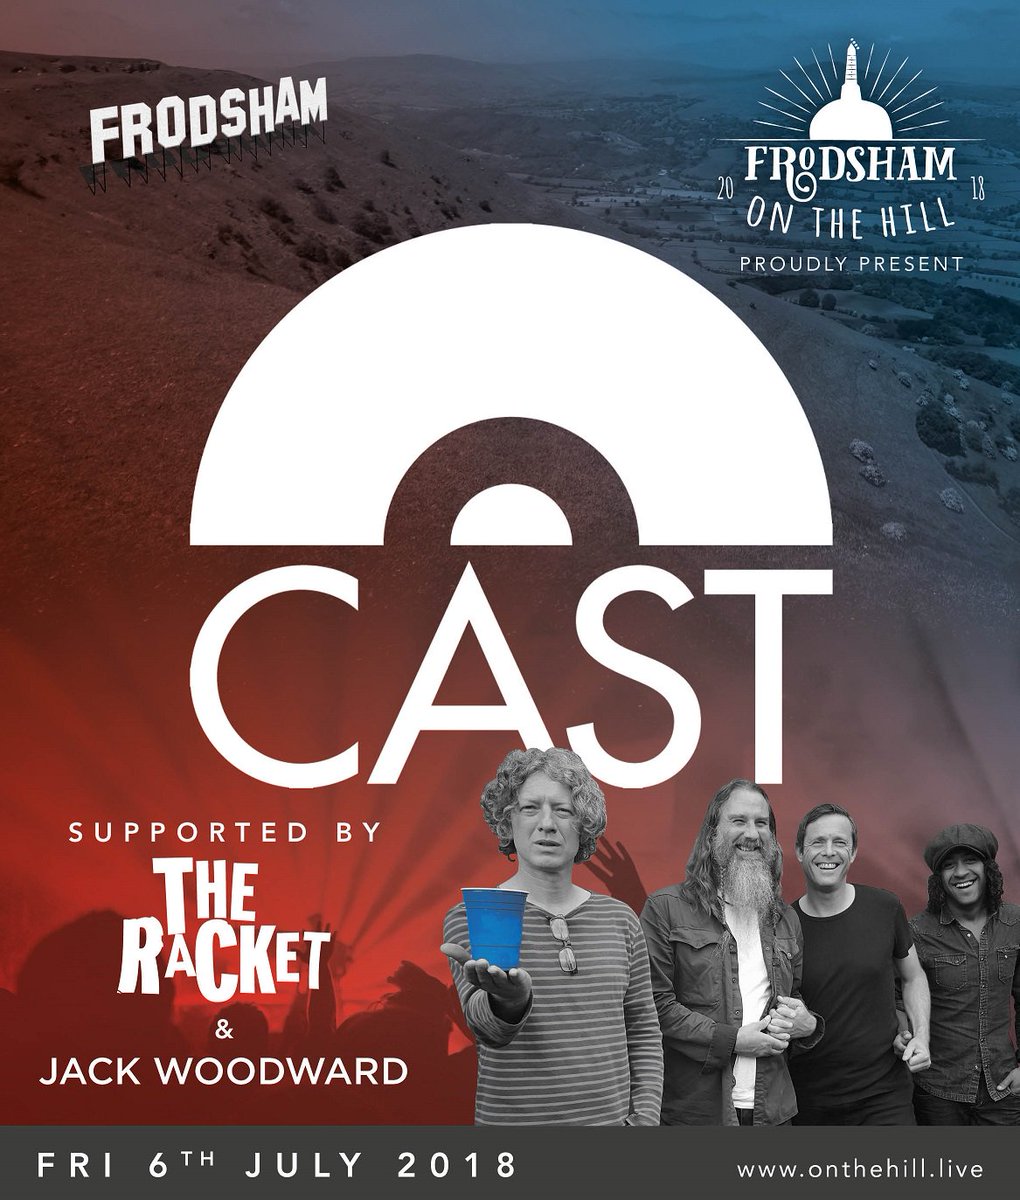 Come see @castofficial with @TheRacketUK & @jackwoodwardjw at Frodsham On The Hill Festival Friday 6th July. Early bird tickets no on sale £20.00 onthehill.live